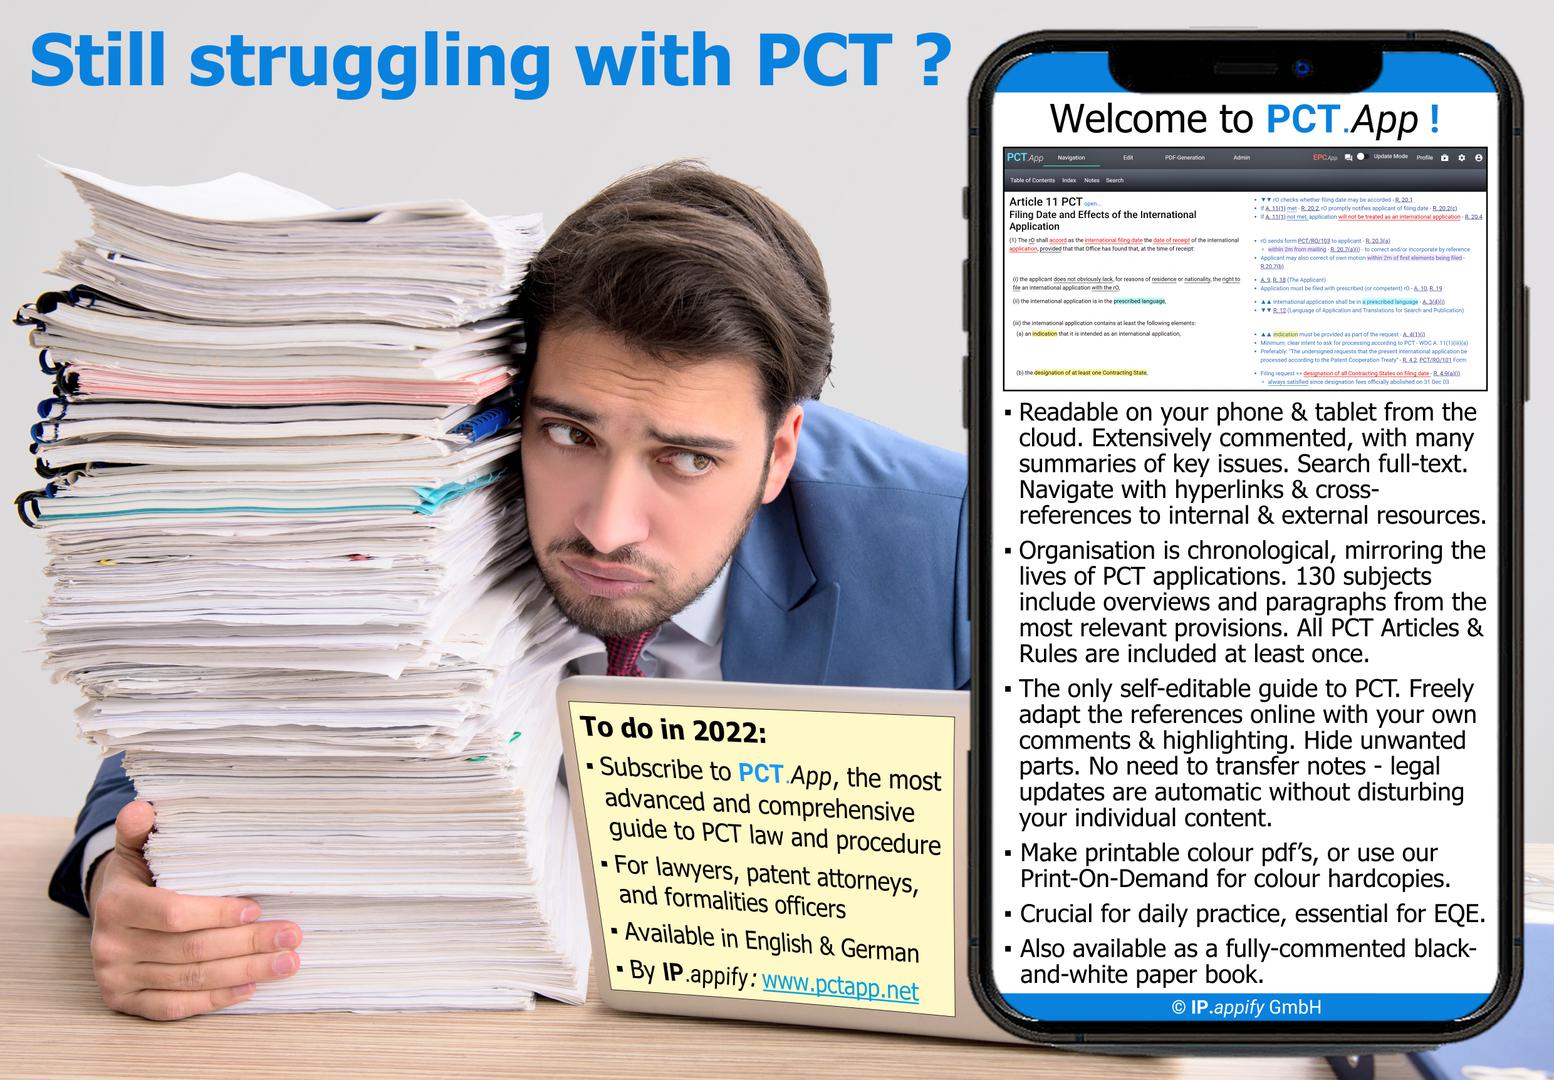 TLDR: most advanced and comprehensive guide to PCT law & procedure